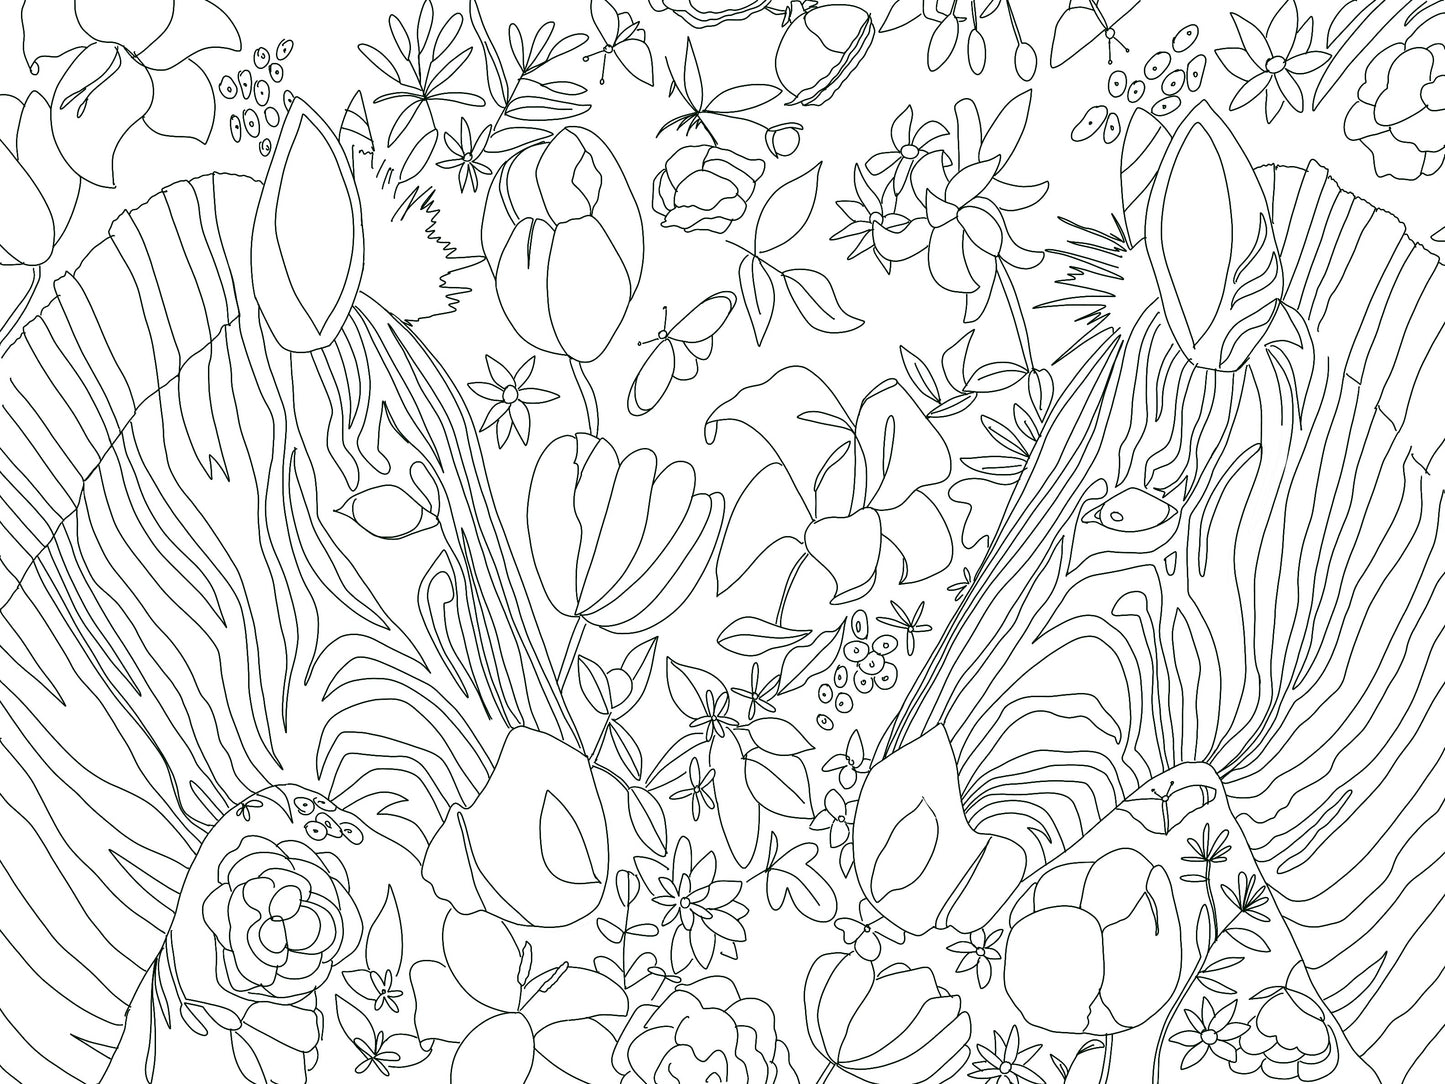 Betsey Johnson’s Safari Digital Coloring Page for ProCreate